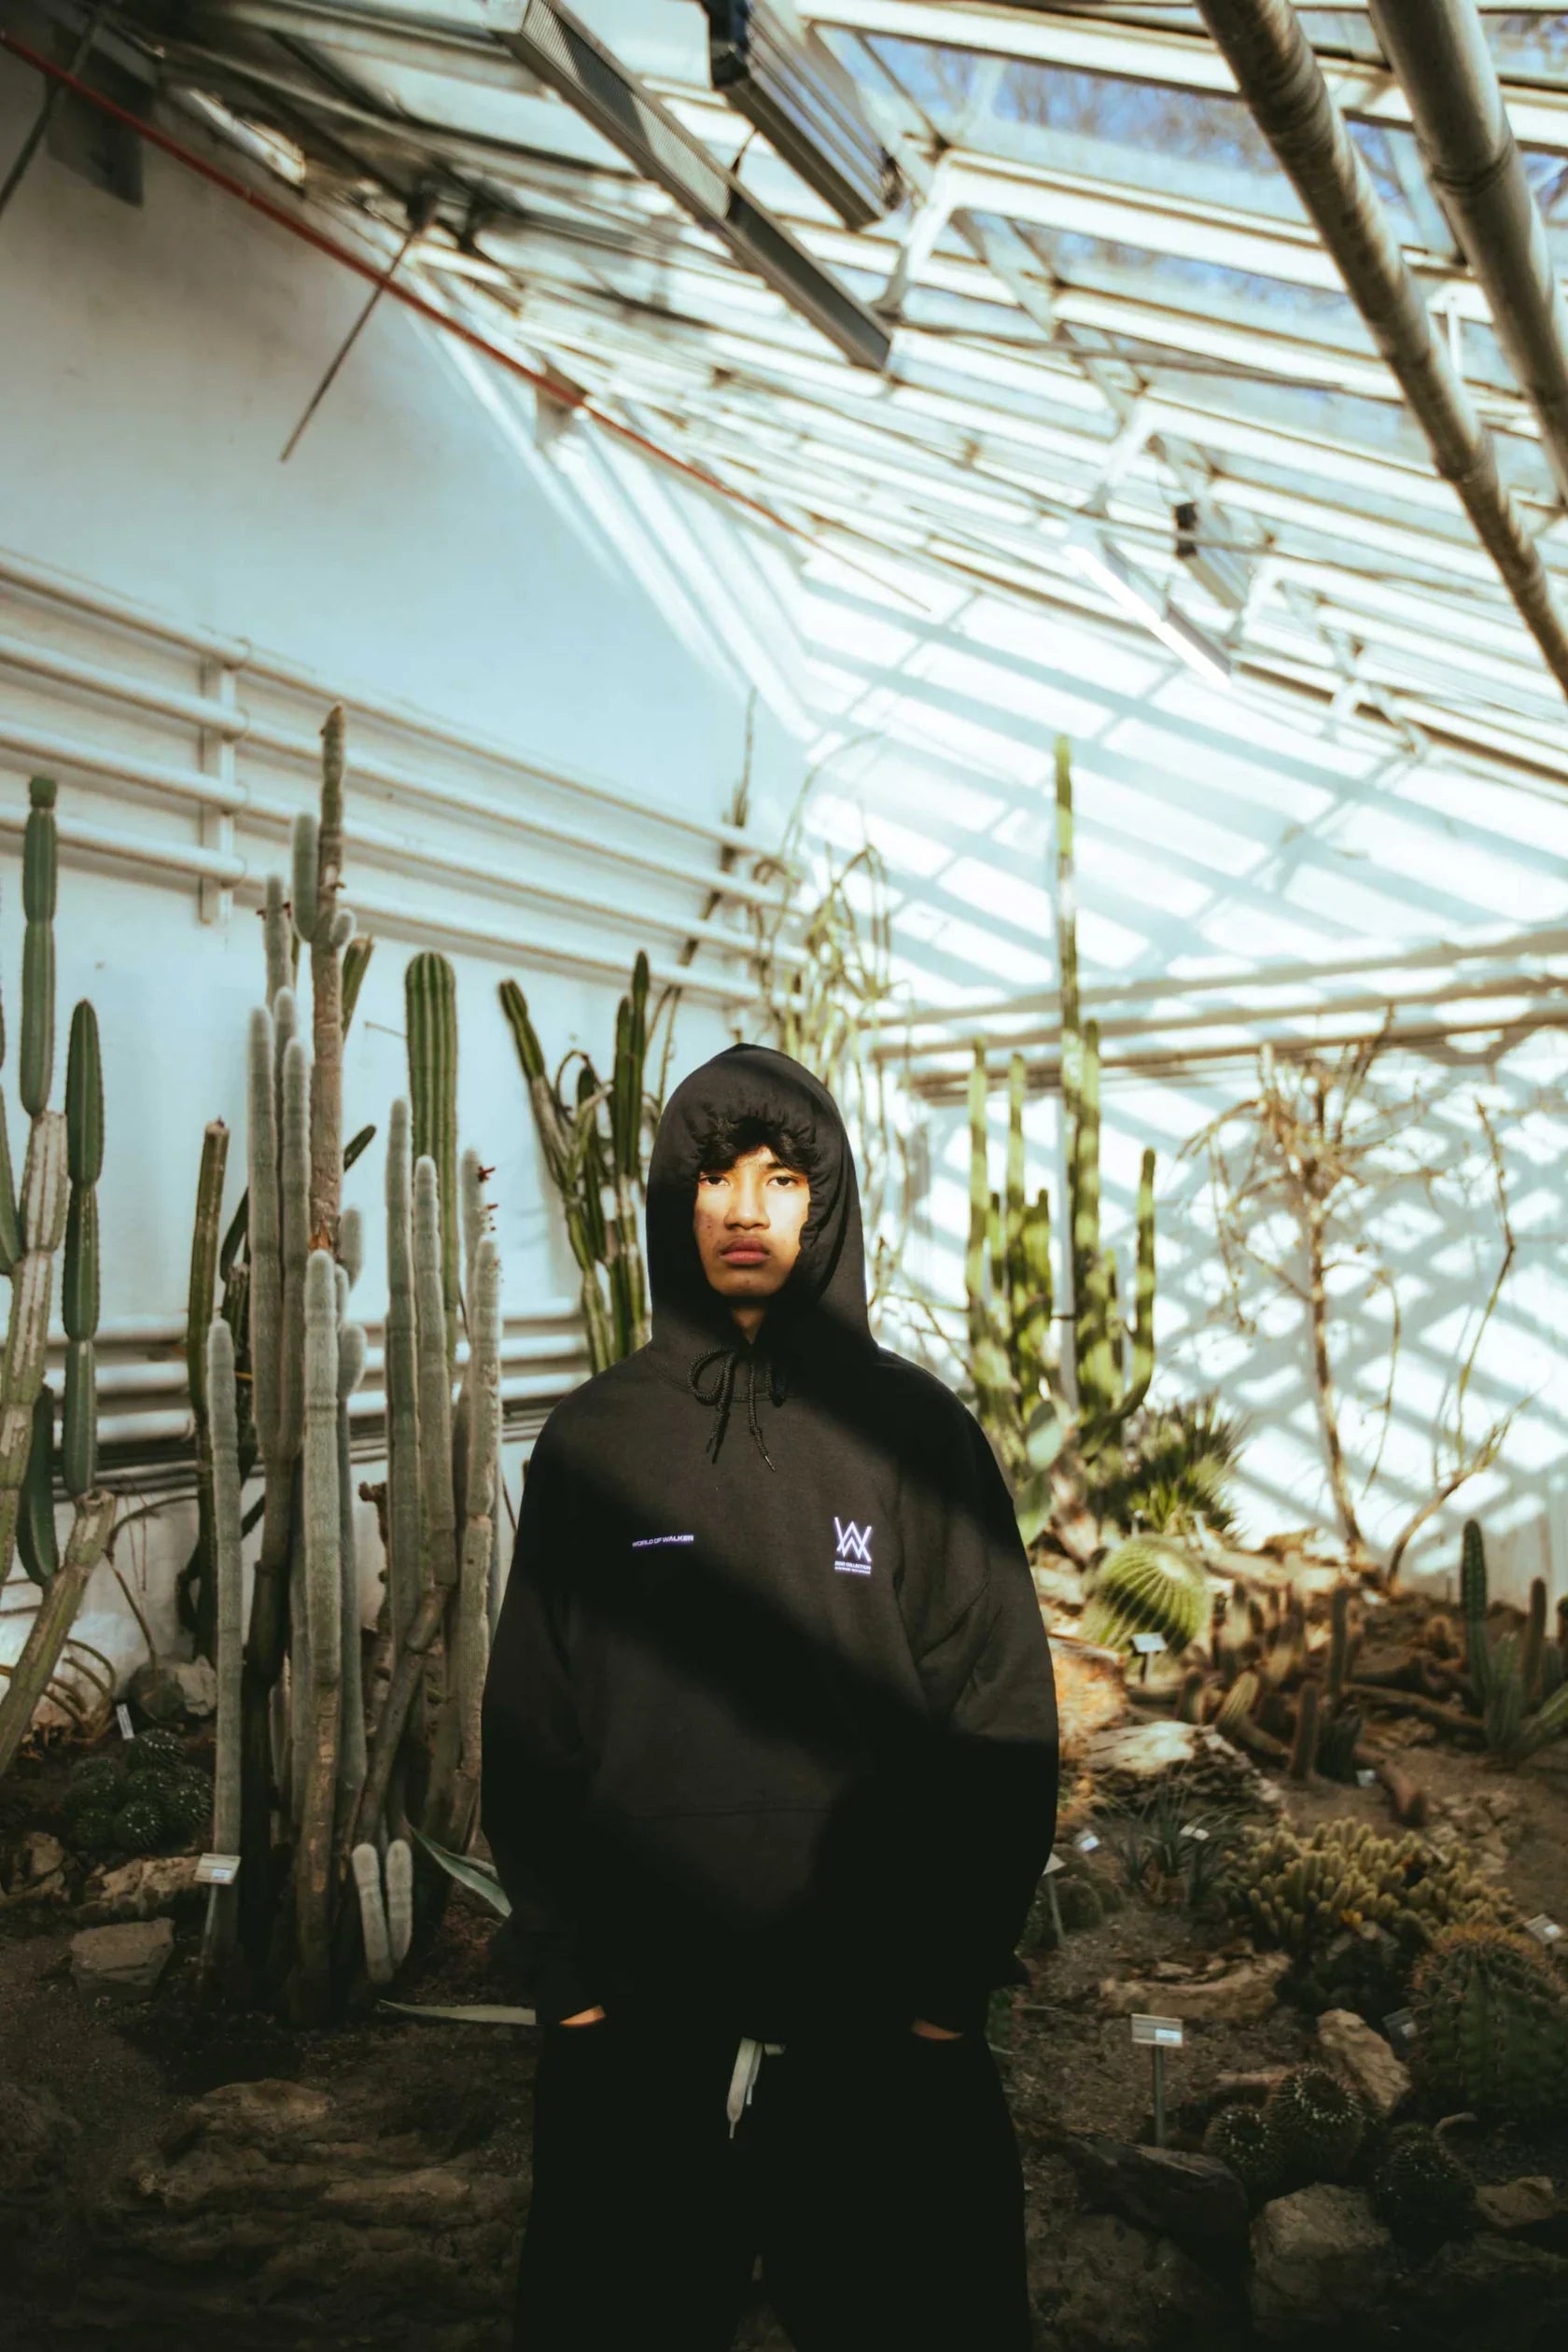 Fashion meets nature with the Melting Rose Hoodie worn in a lush greenhouse, reflecting Alan Walker's fusion of art and music.